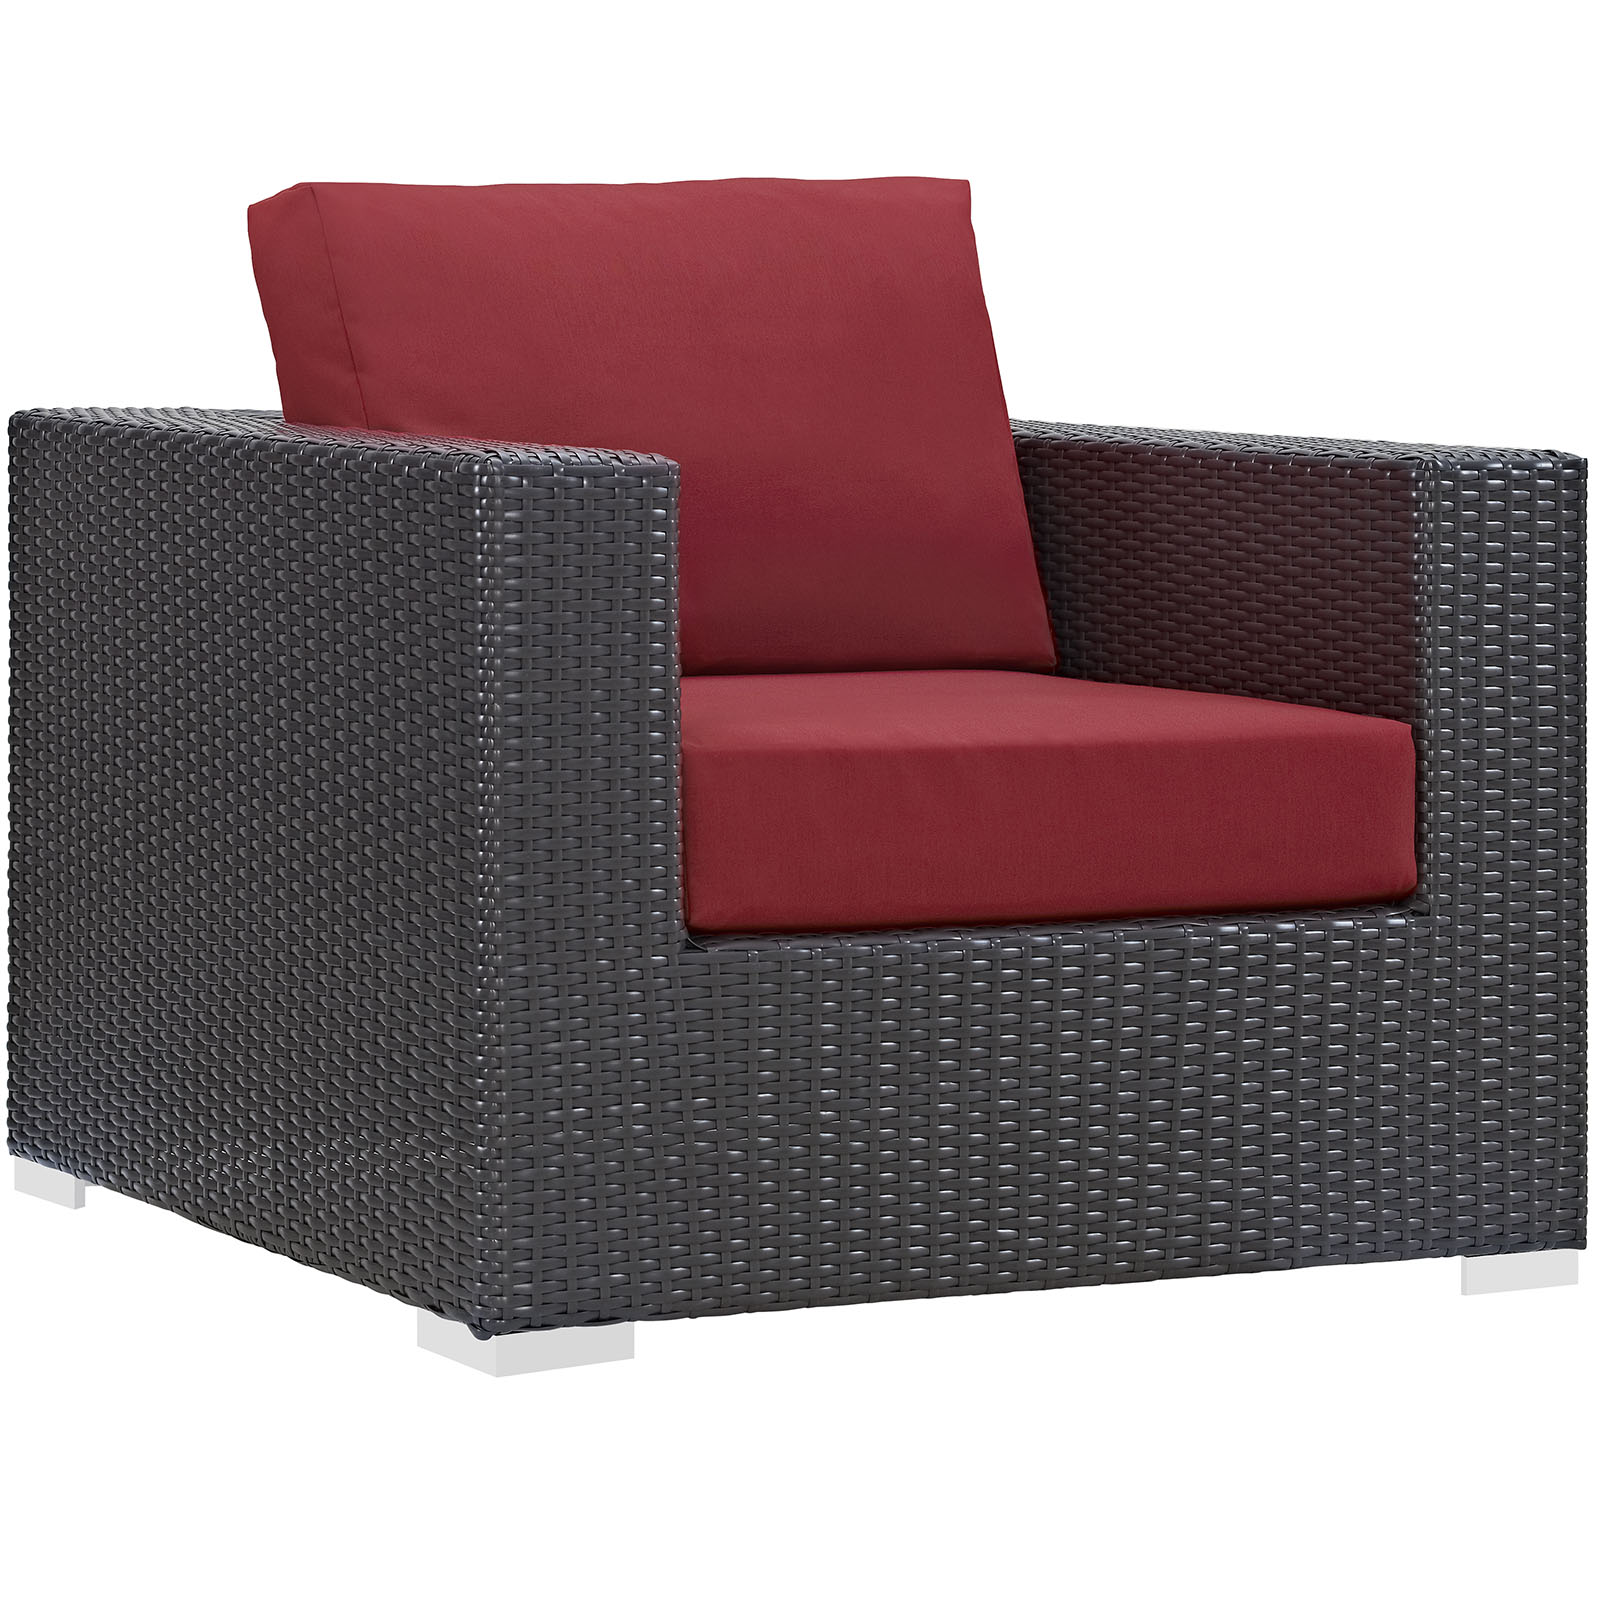 Modway Convene 6 Piece Patio Sofa Set in Espresso and Red - image 5 of 8